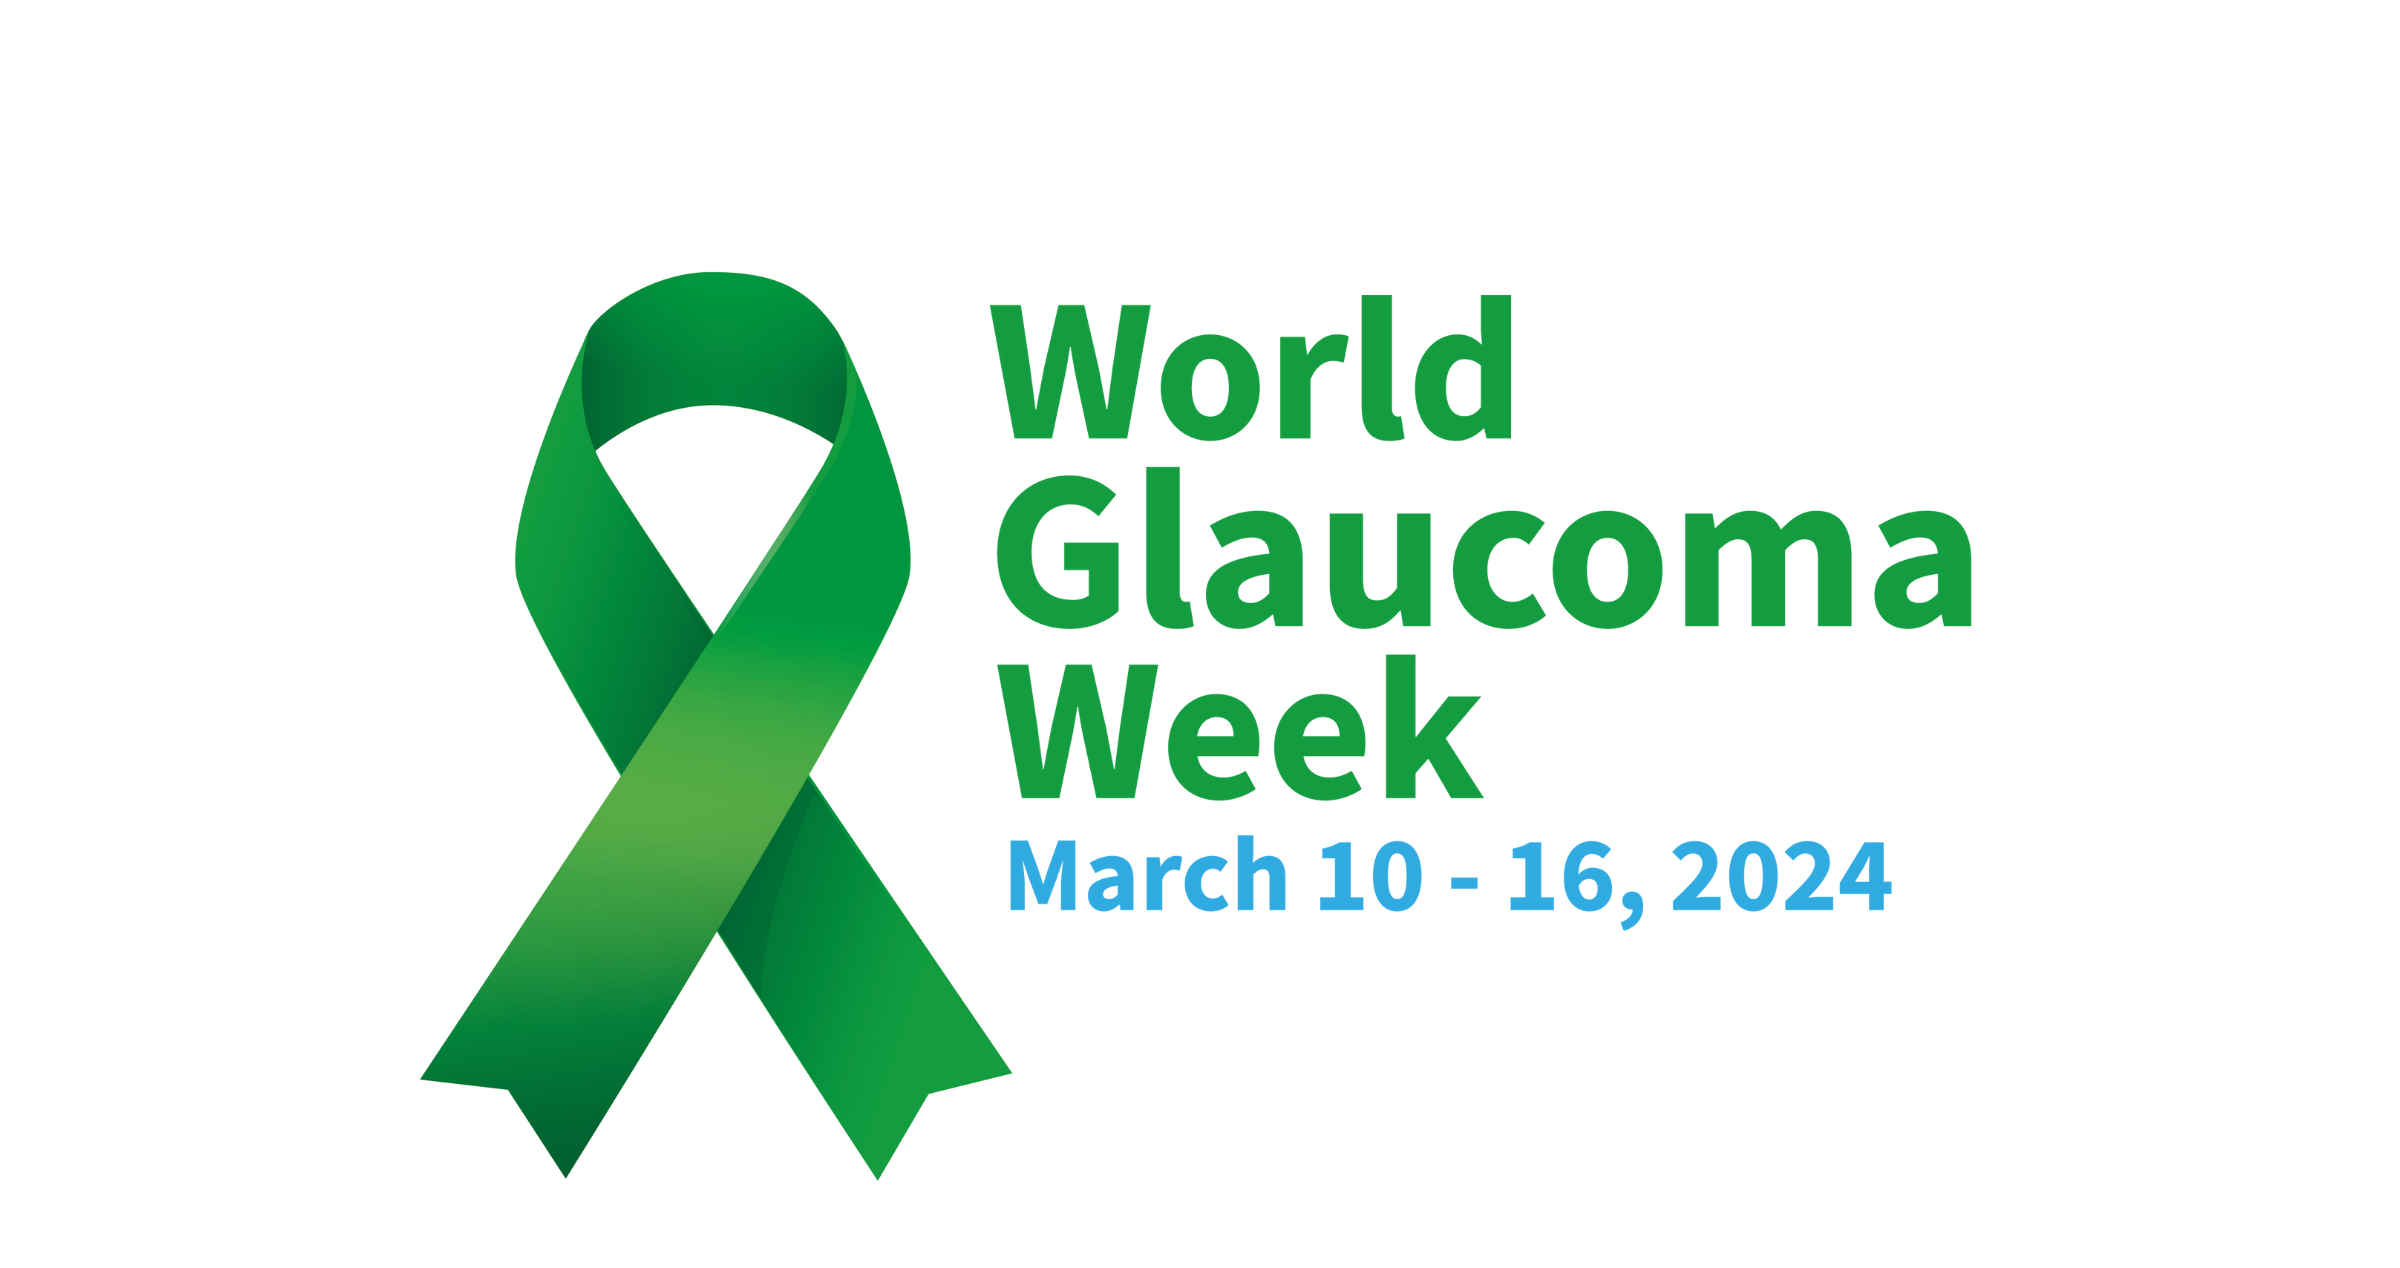 World Glaucoma Week 10 - 16 March, 2024